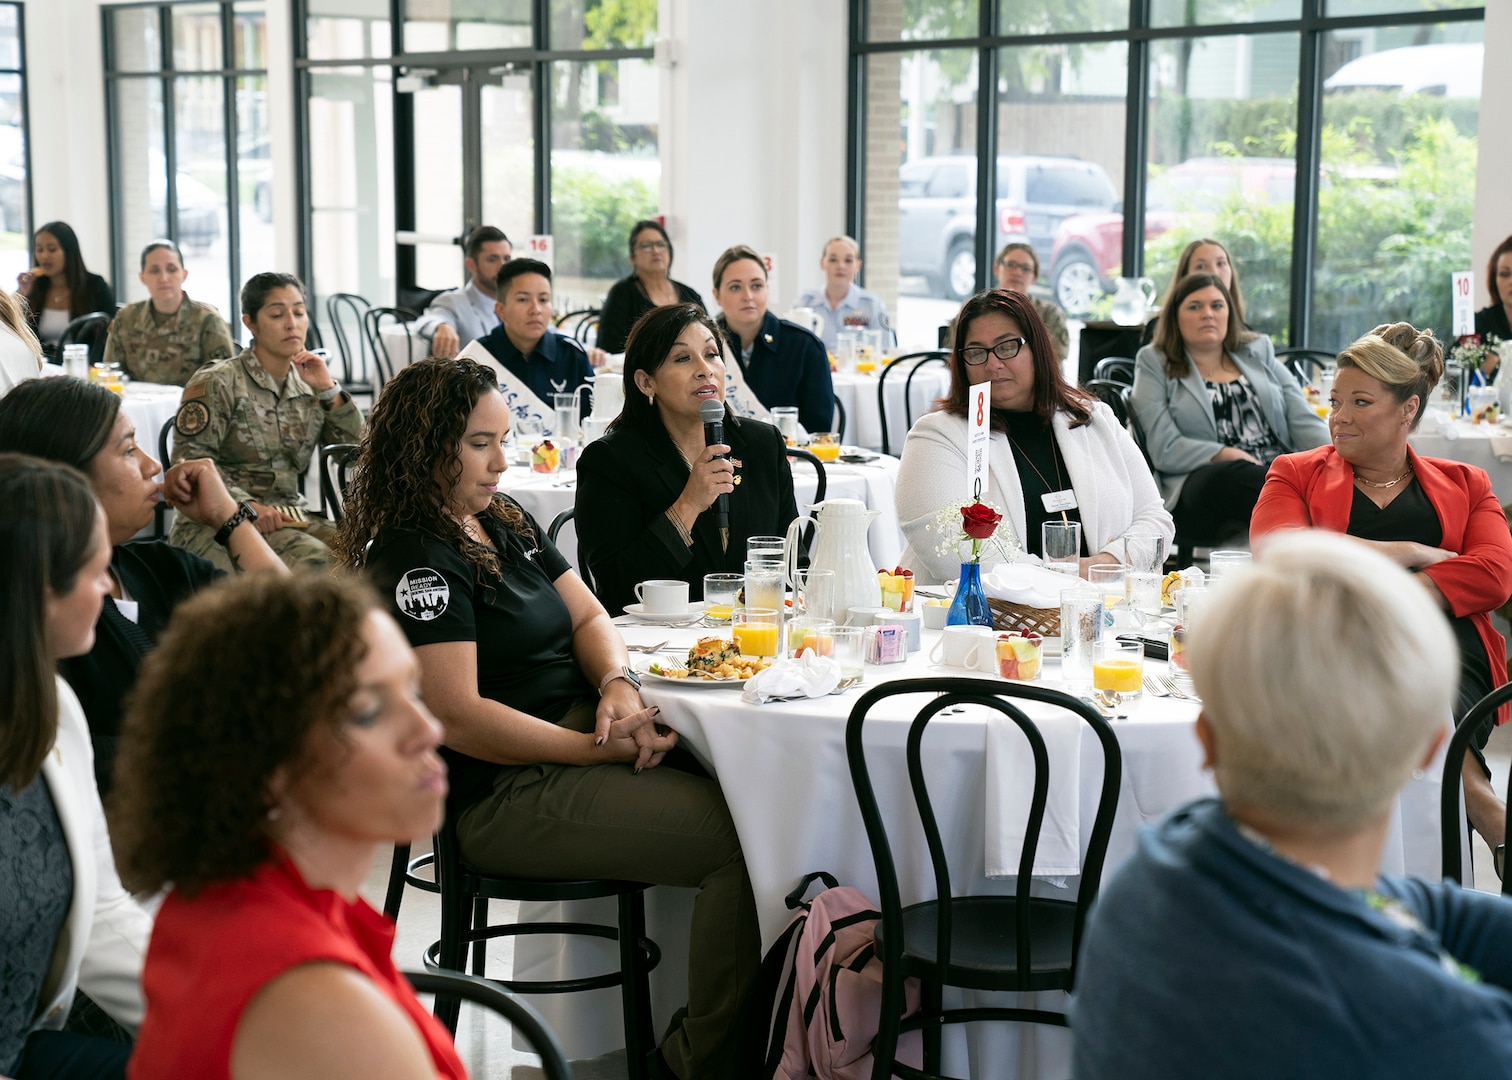 Celebrate America’s Military 2023: Chamber hosts Annual Women in the Military Panel